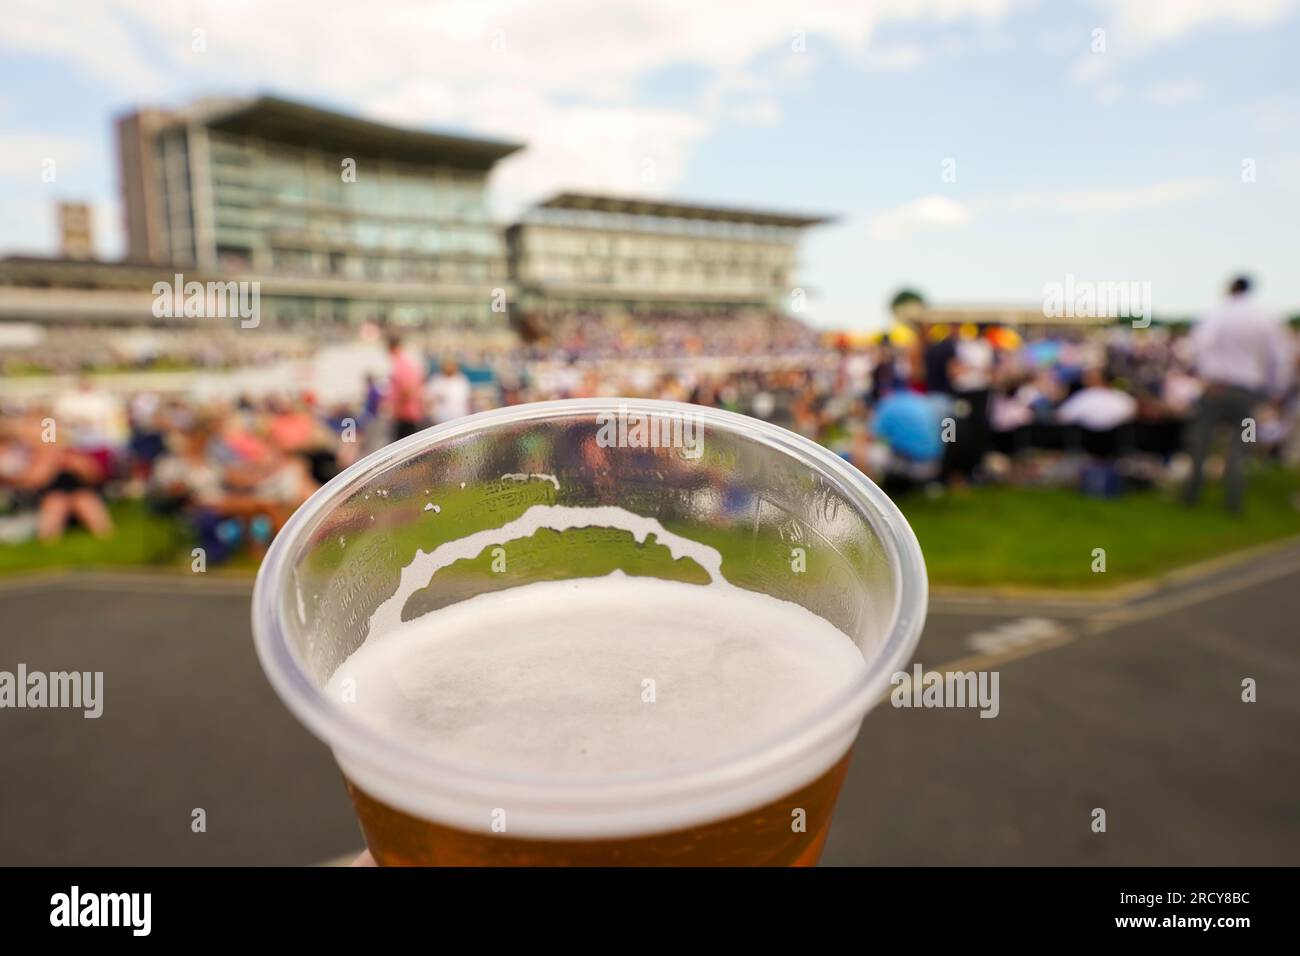 York Races, a plastic cup with beer, alcoholic beverage, with blurred unrecognizable crowds picnicking and racecourse grandstands in the background. Stock Photo